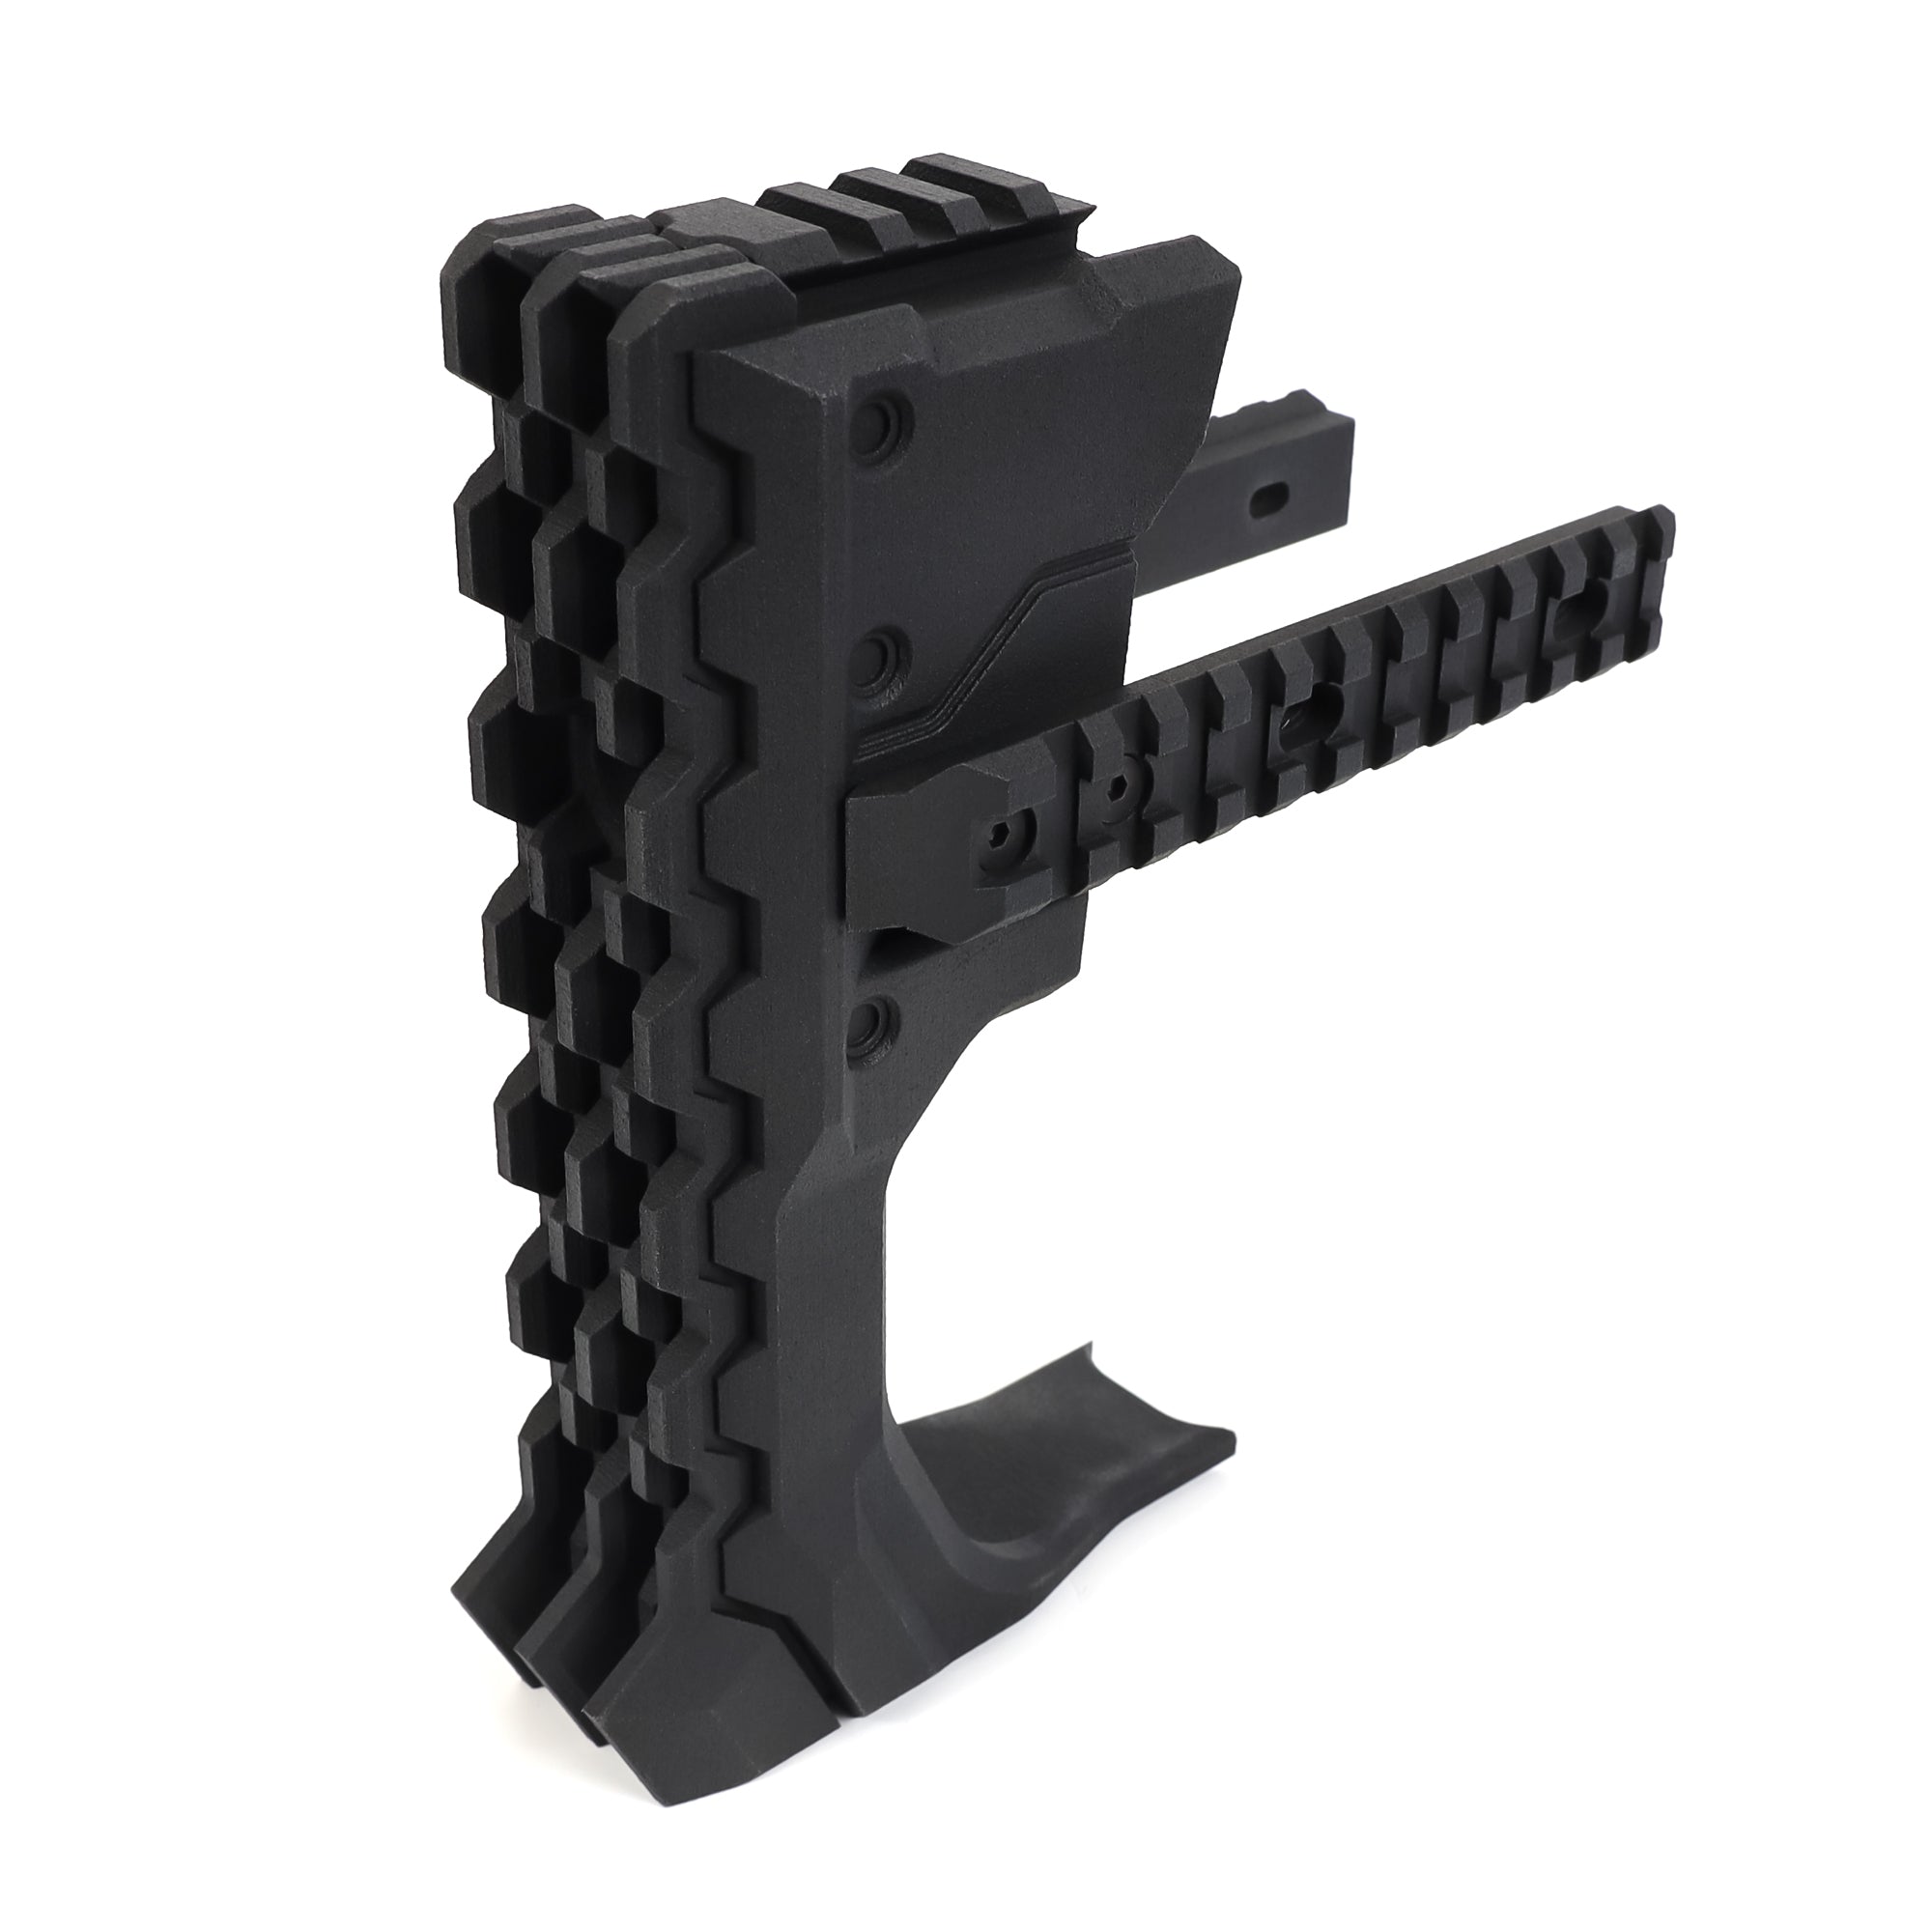 【MTO】【LayLax.com Limited】KRYTAC KRISS VECTOR STRIKE RAIL SYSTEM 2.0 [PROTO GEAR ARTS]【To be released at the end of June! Now accepting reservations!】